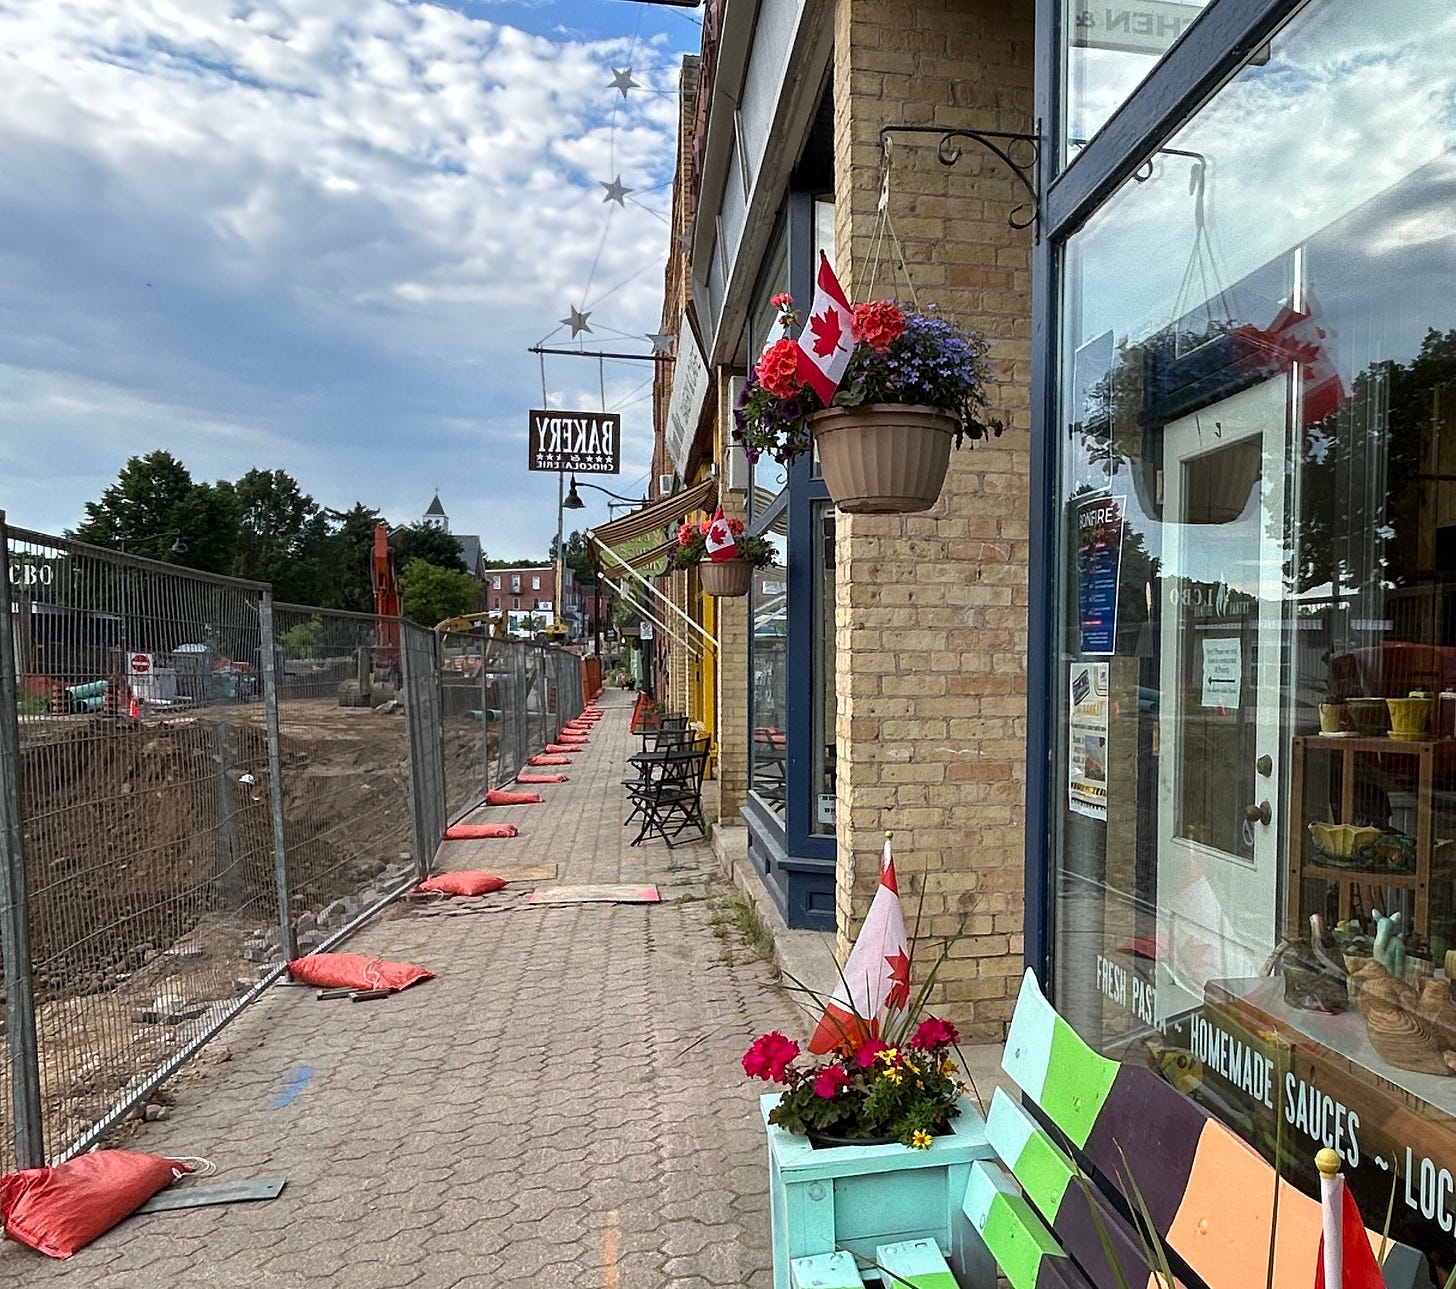 A street under construction with fencing between the road and sidewalk and businesses along the right side.